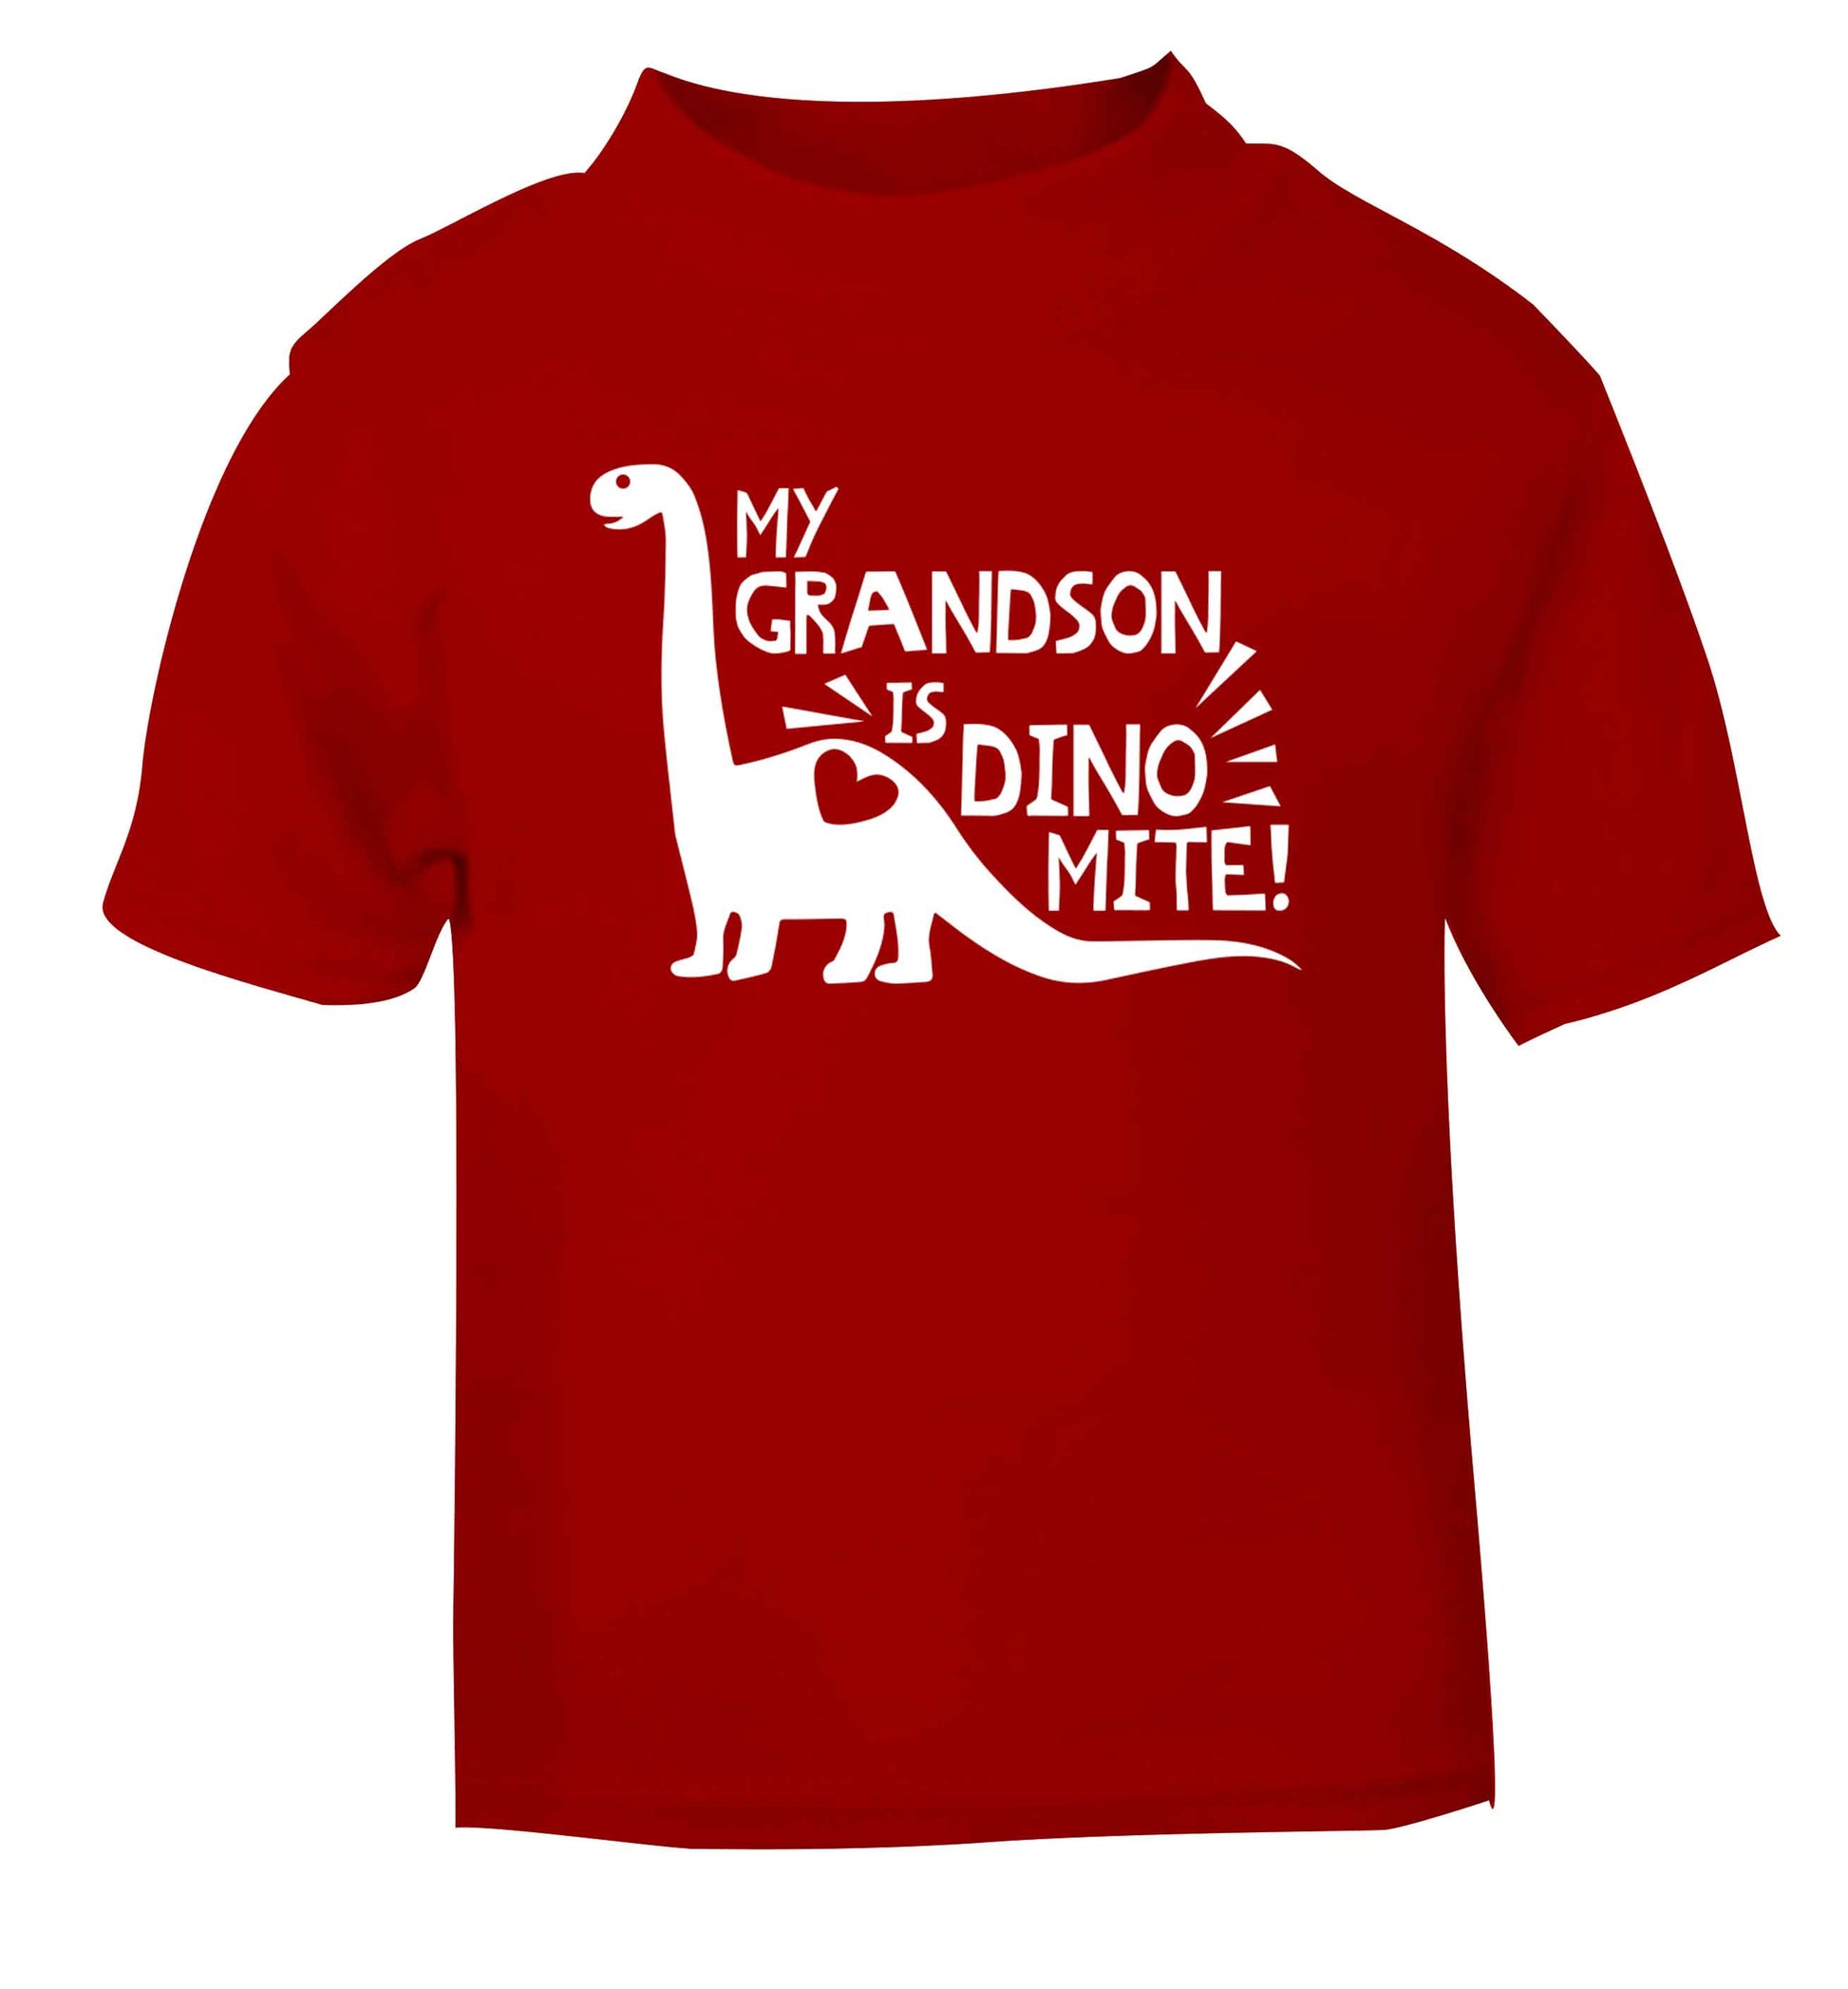 My grandson is dinomite! red Baby Toddler Tshirt 2 Years